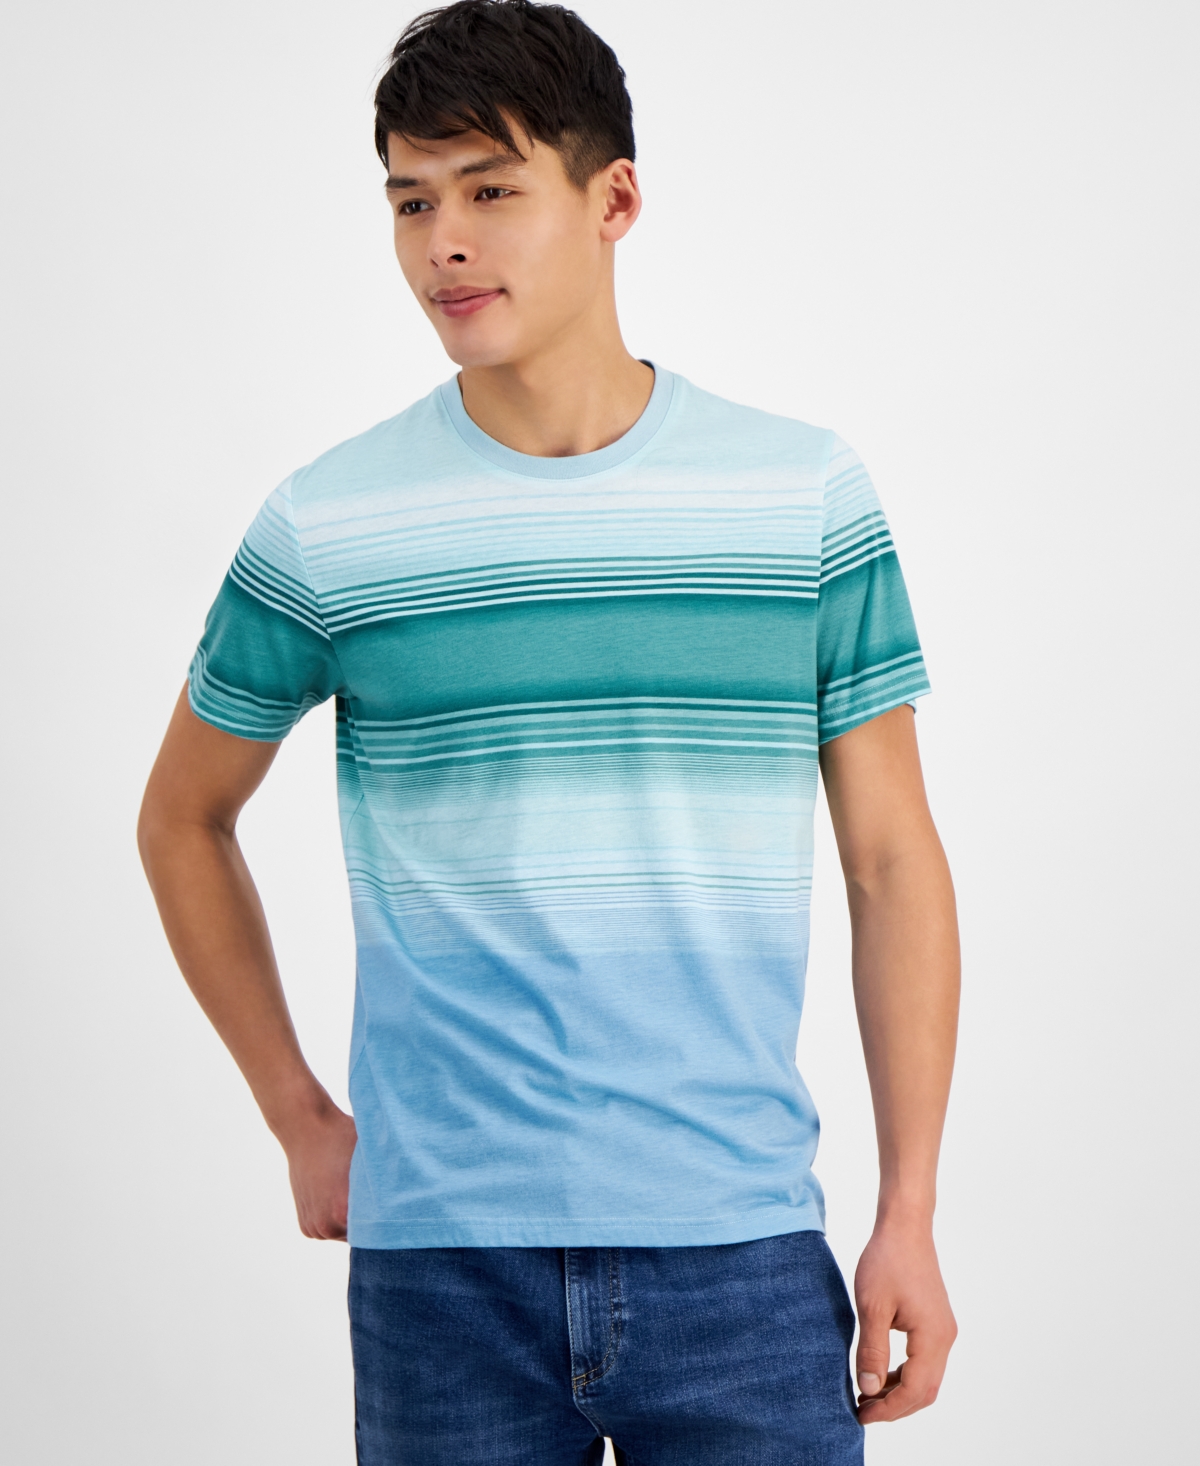 Men's Short Sleeve Crewneck Soft Stripe T-Shirt, Created for Macy's - Sea Coral